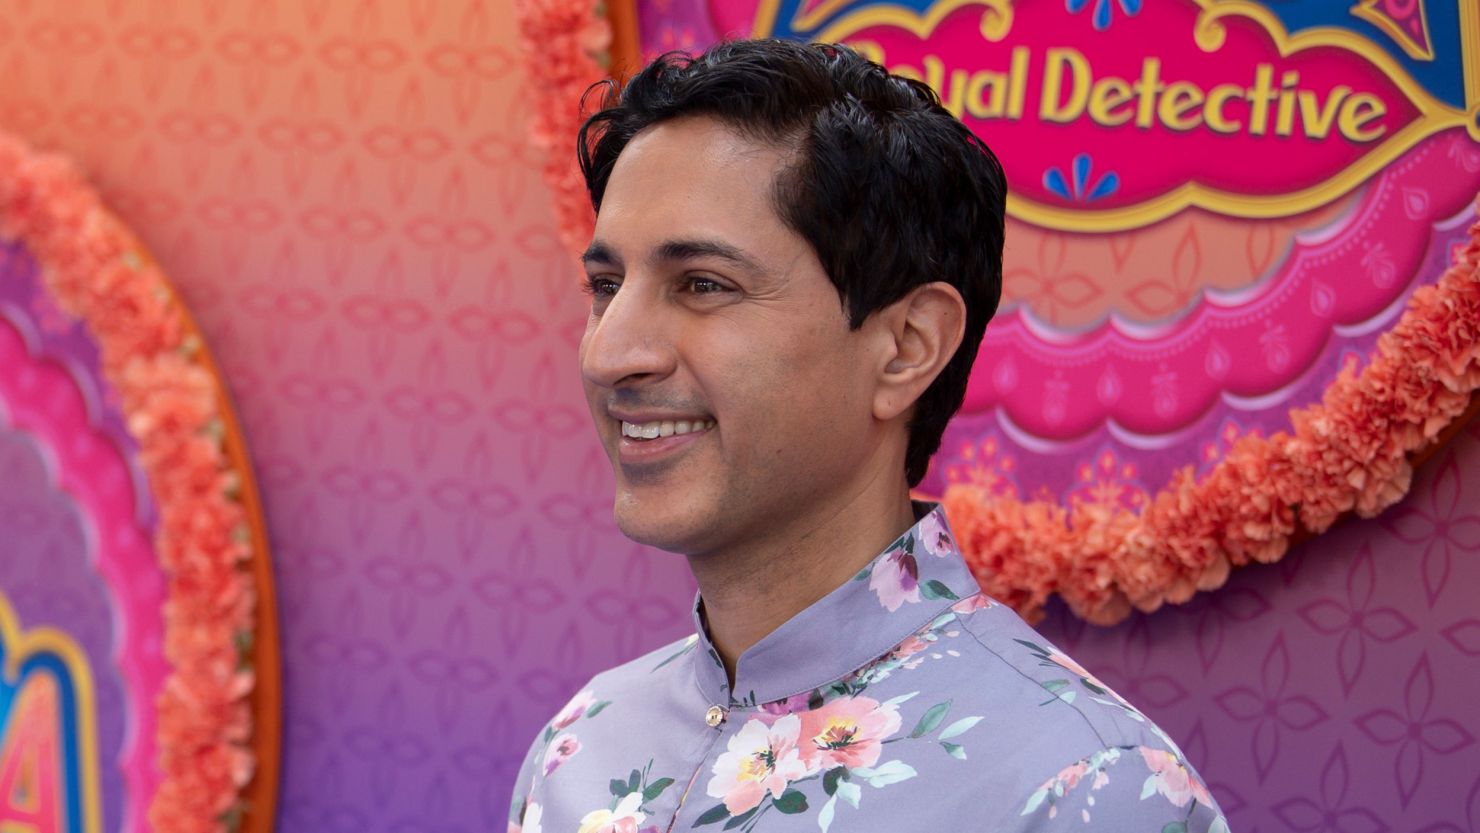 A school board faces backlash after canceling actor and author Maulik Pancholy's event at a local middle school.